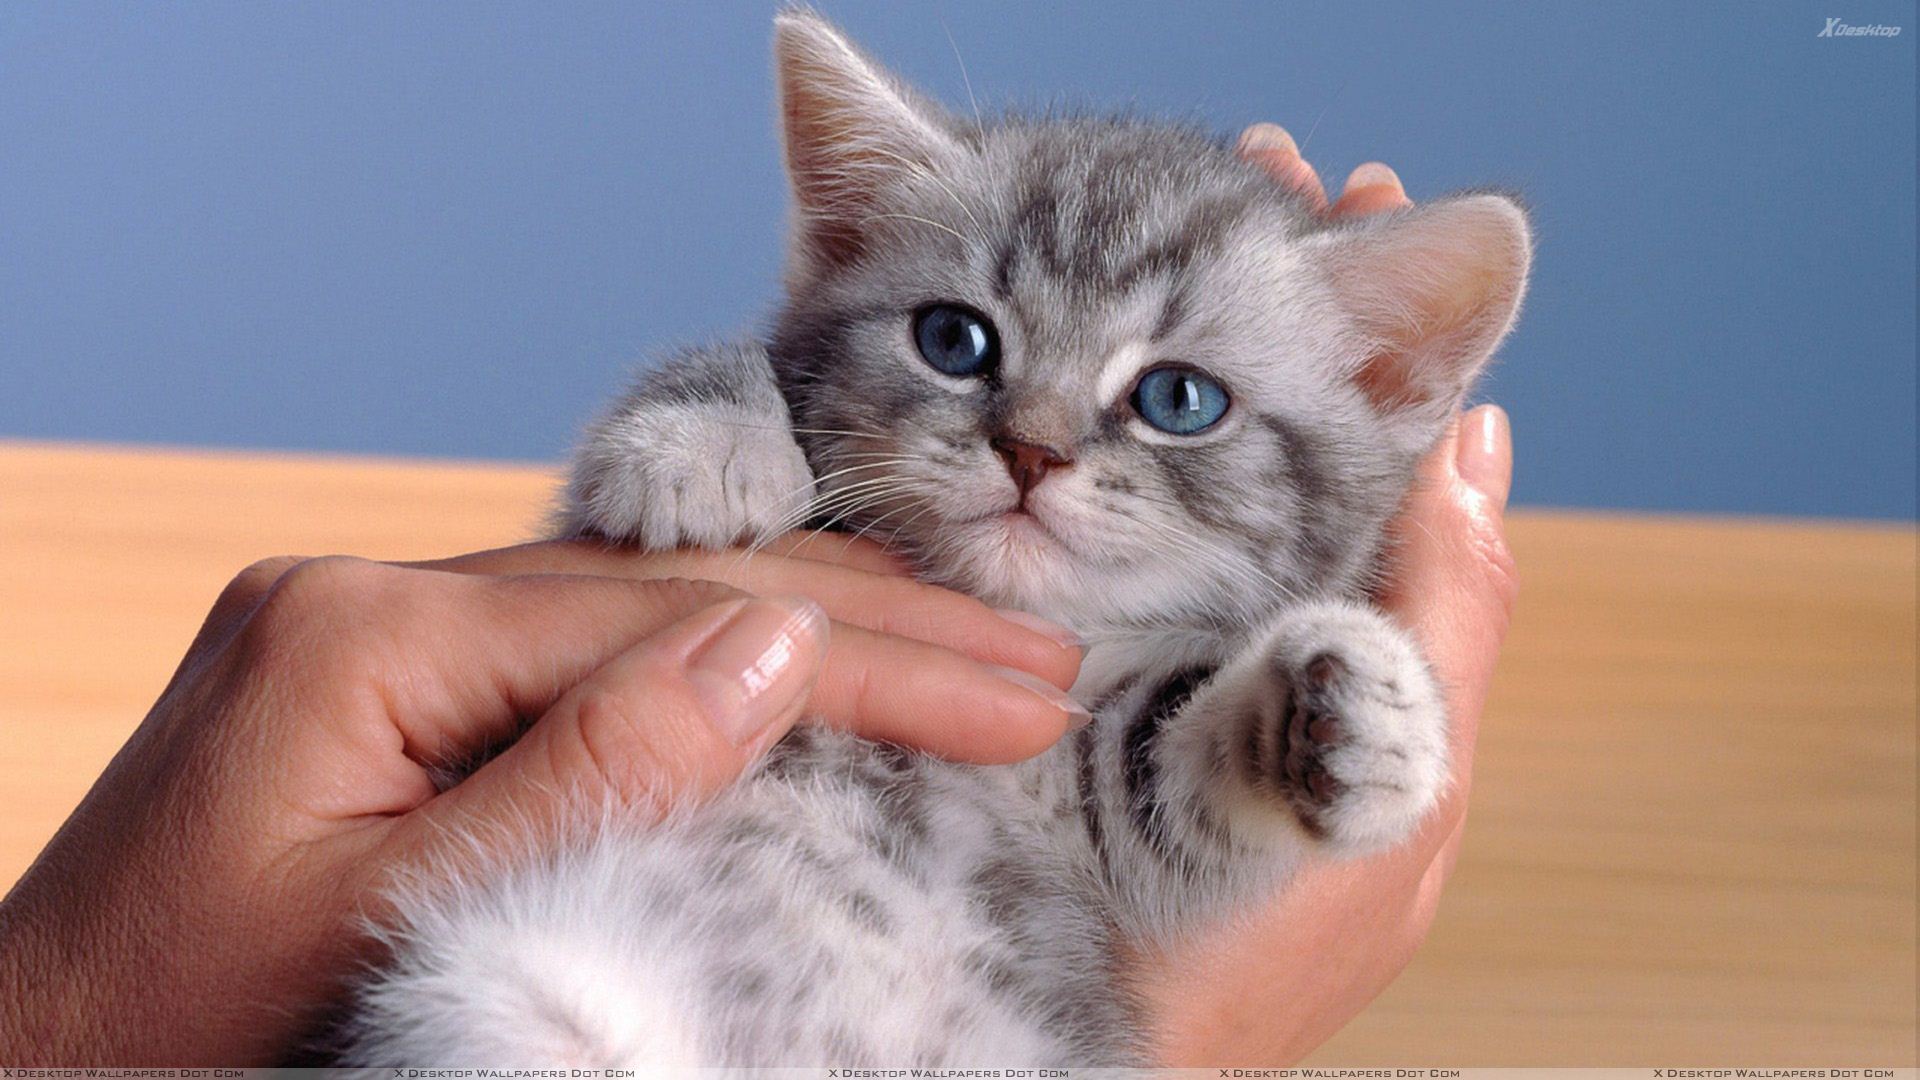 Small Cat In Hand Looking Very Cute Wallpaper